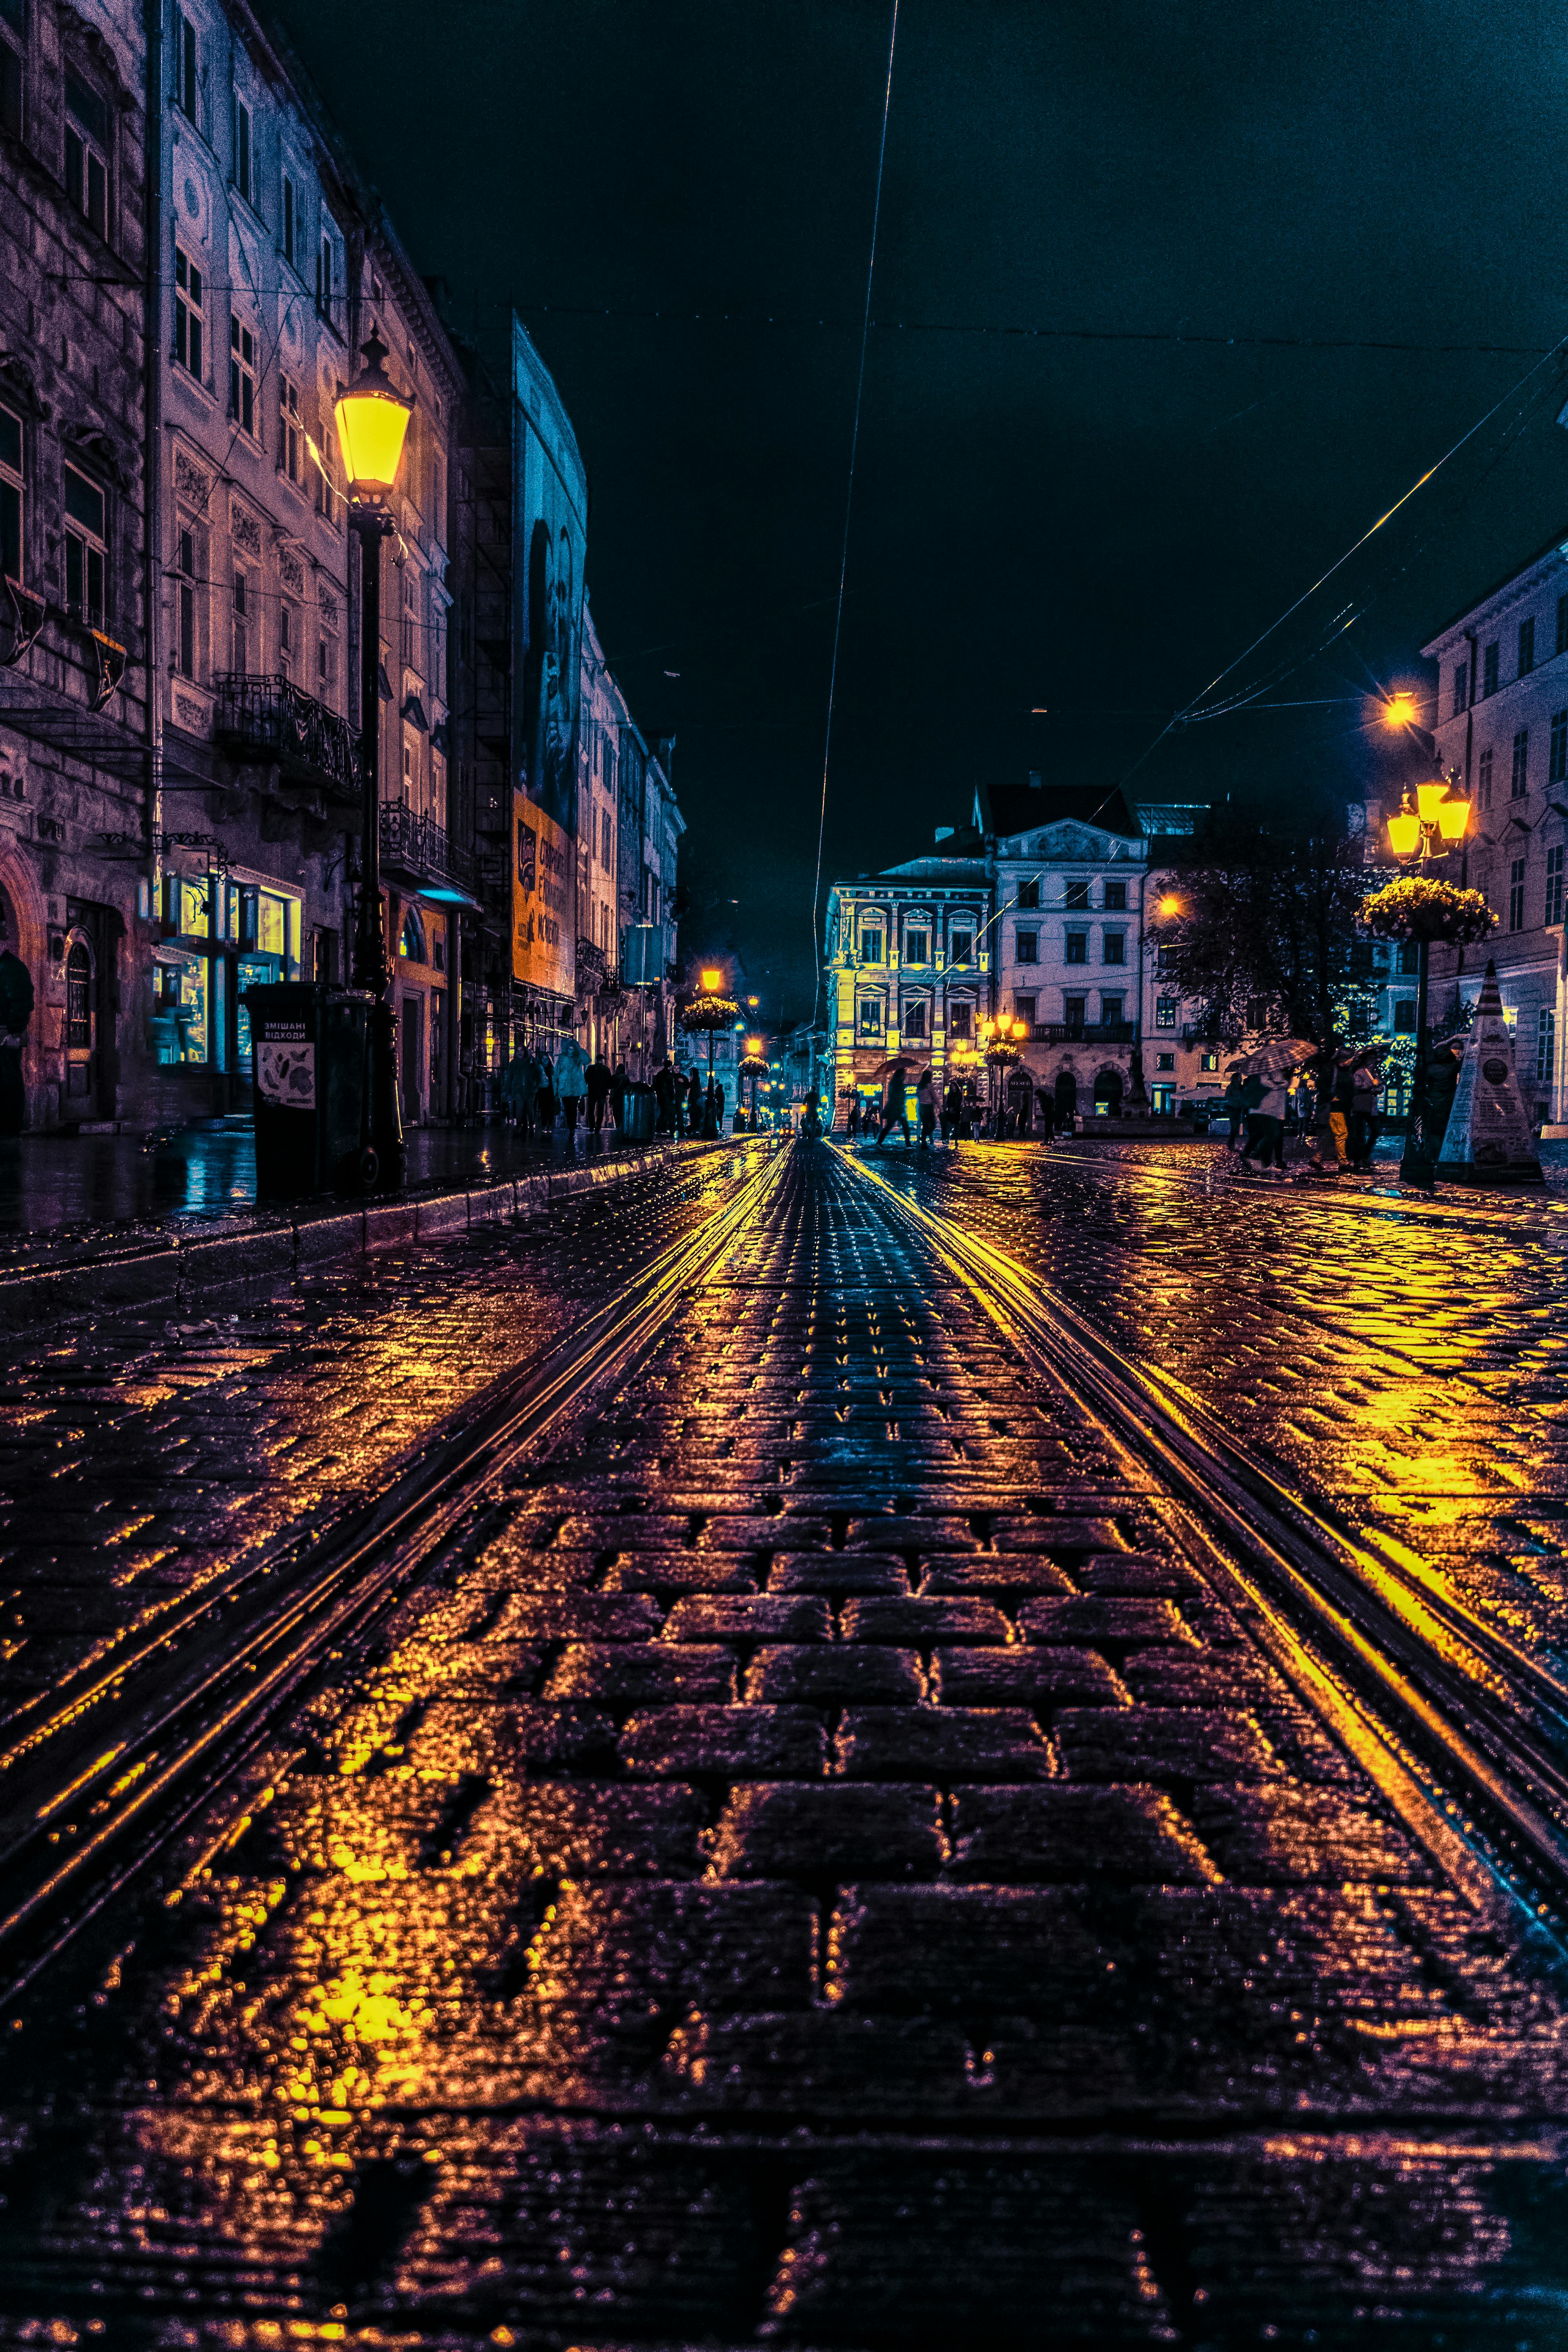 City Night Lights Pictures  Download Free Images on Unsplash